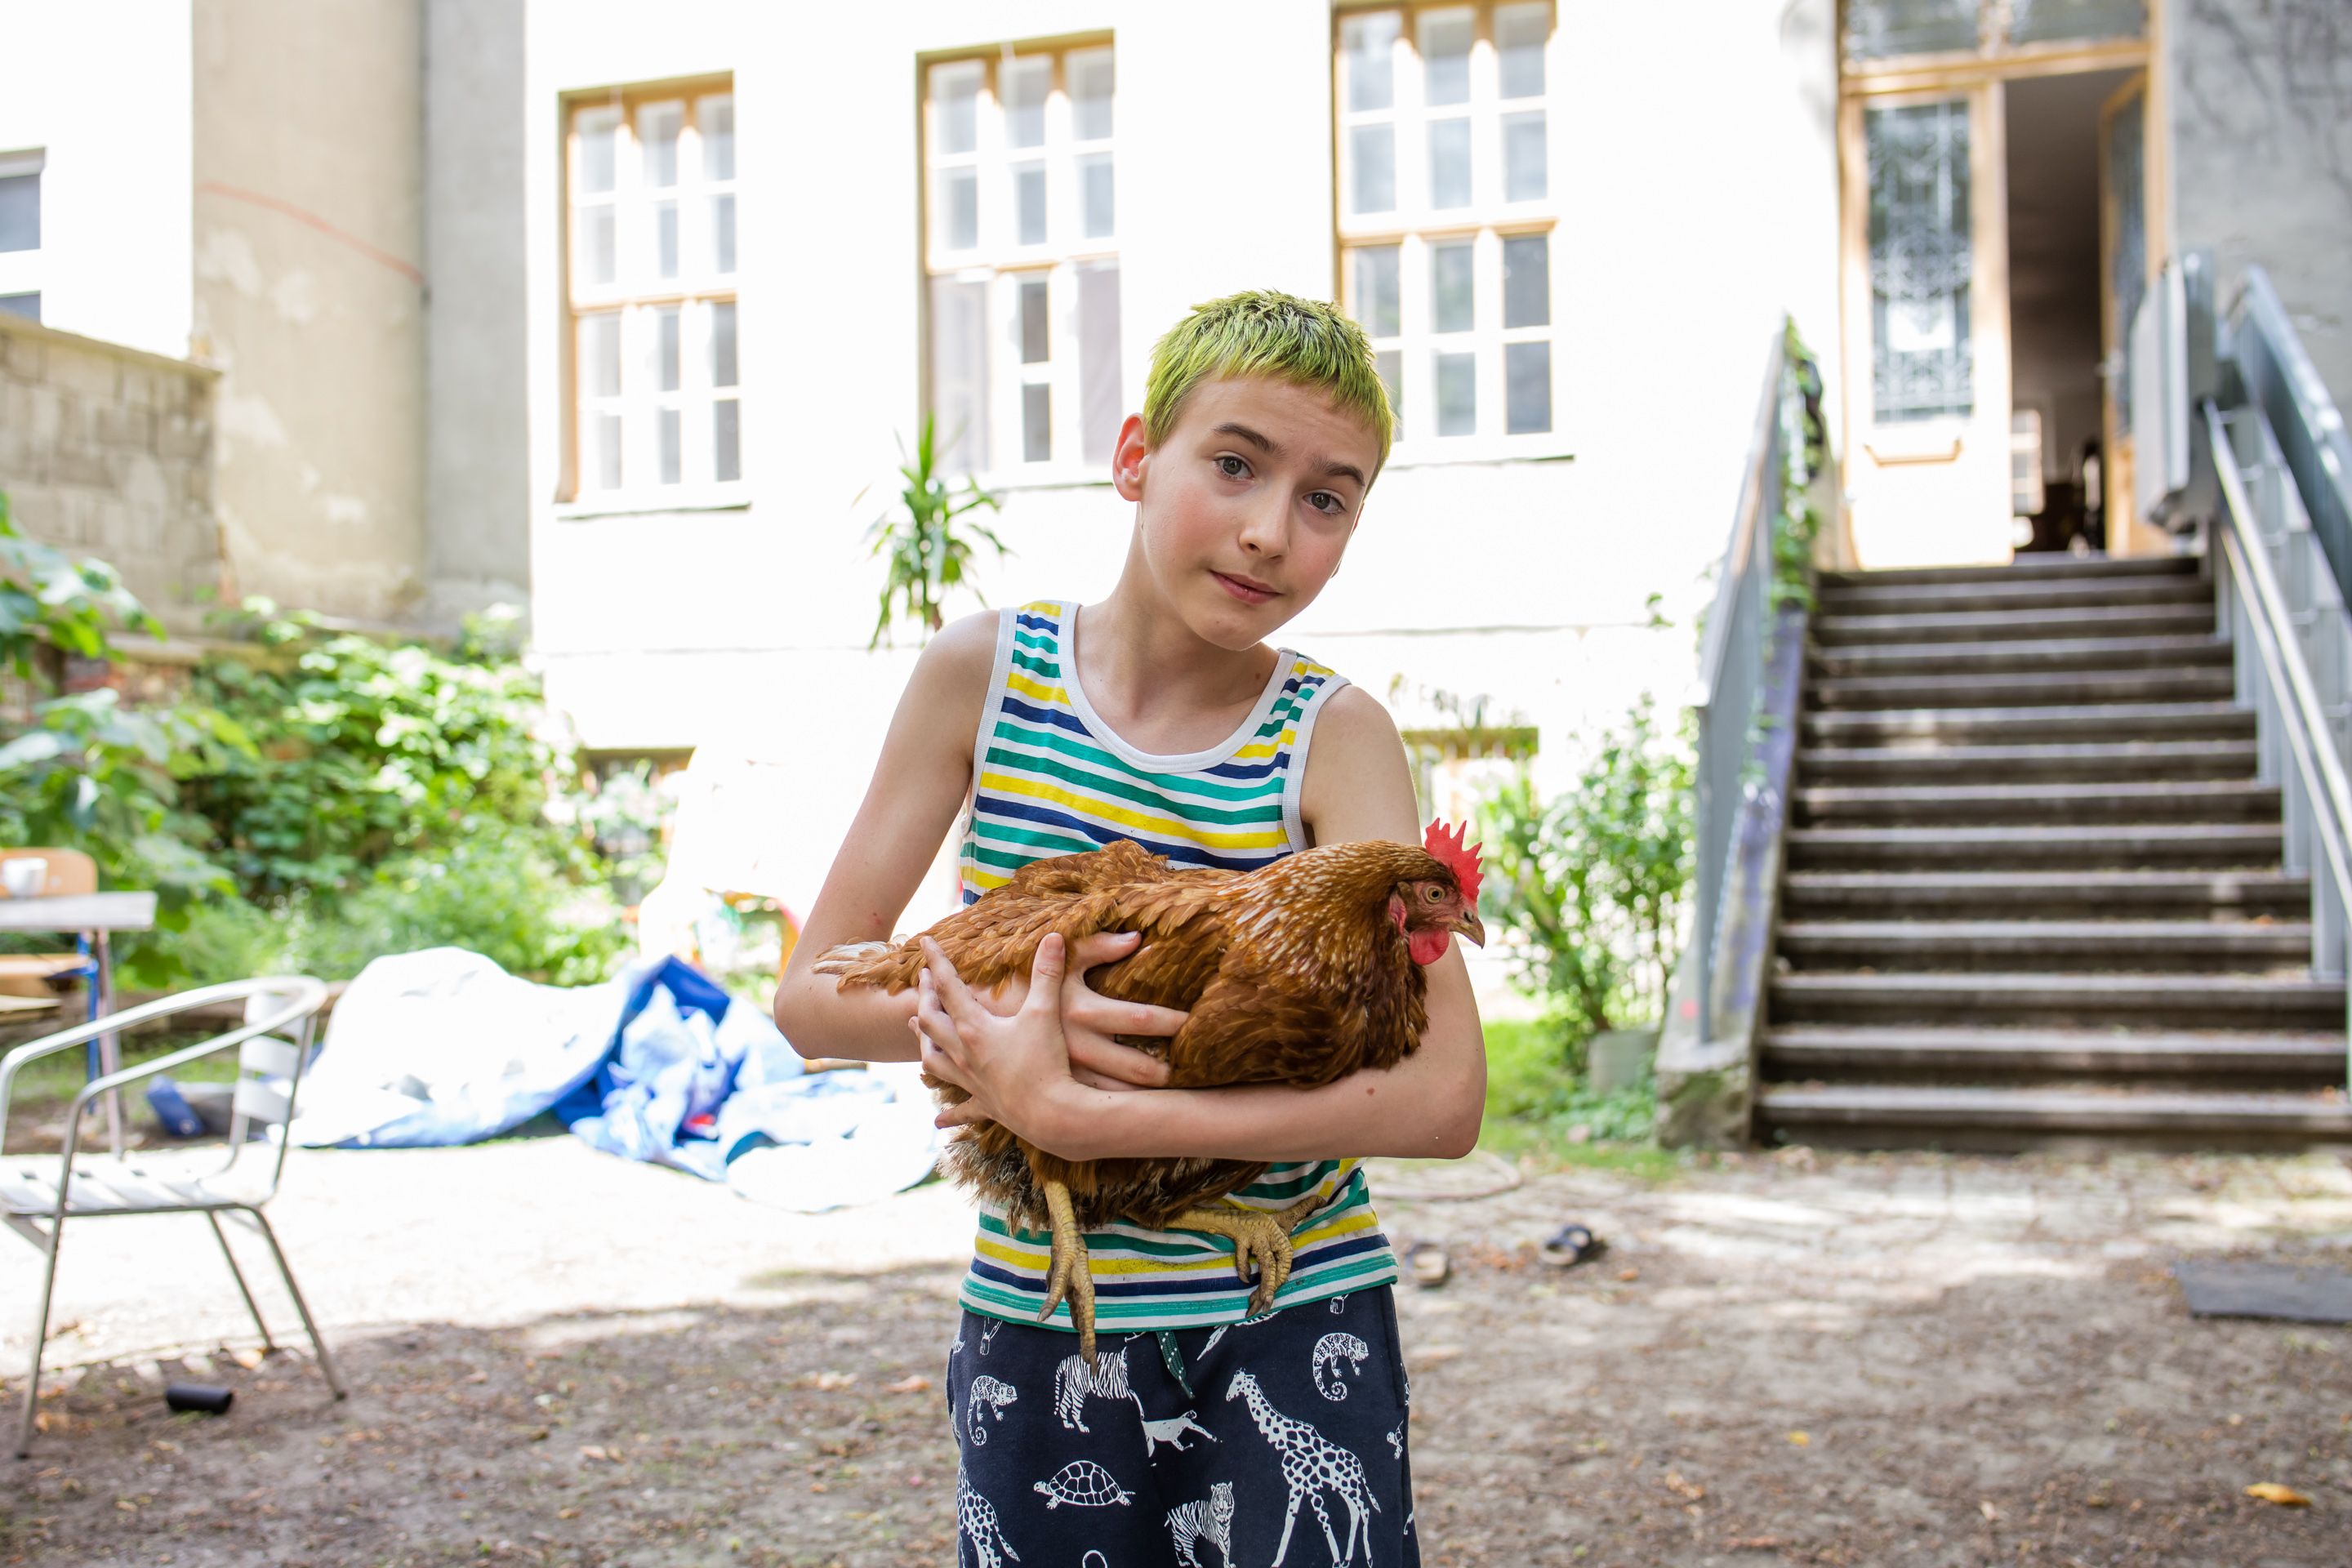 Boy holding a chicken. Behind we see the yard of a house.